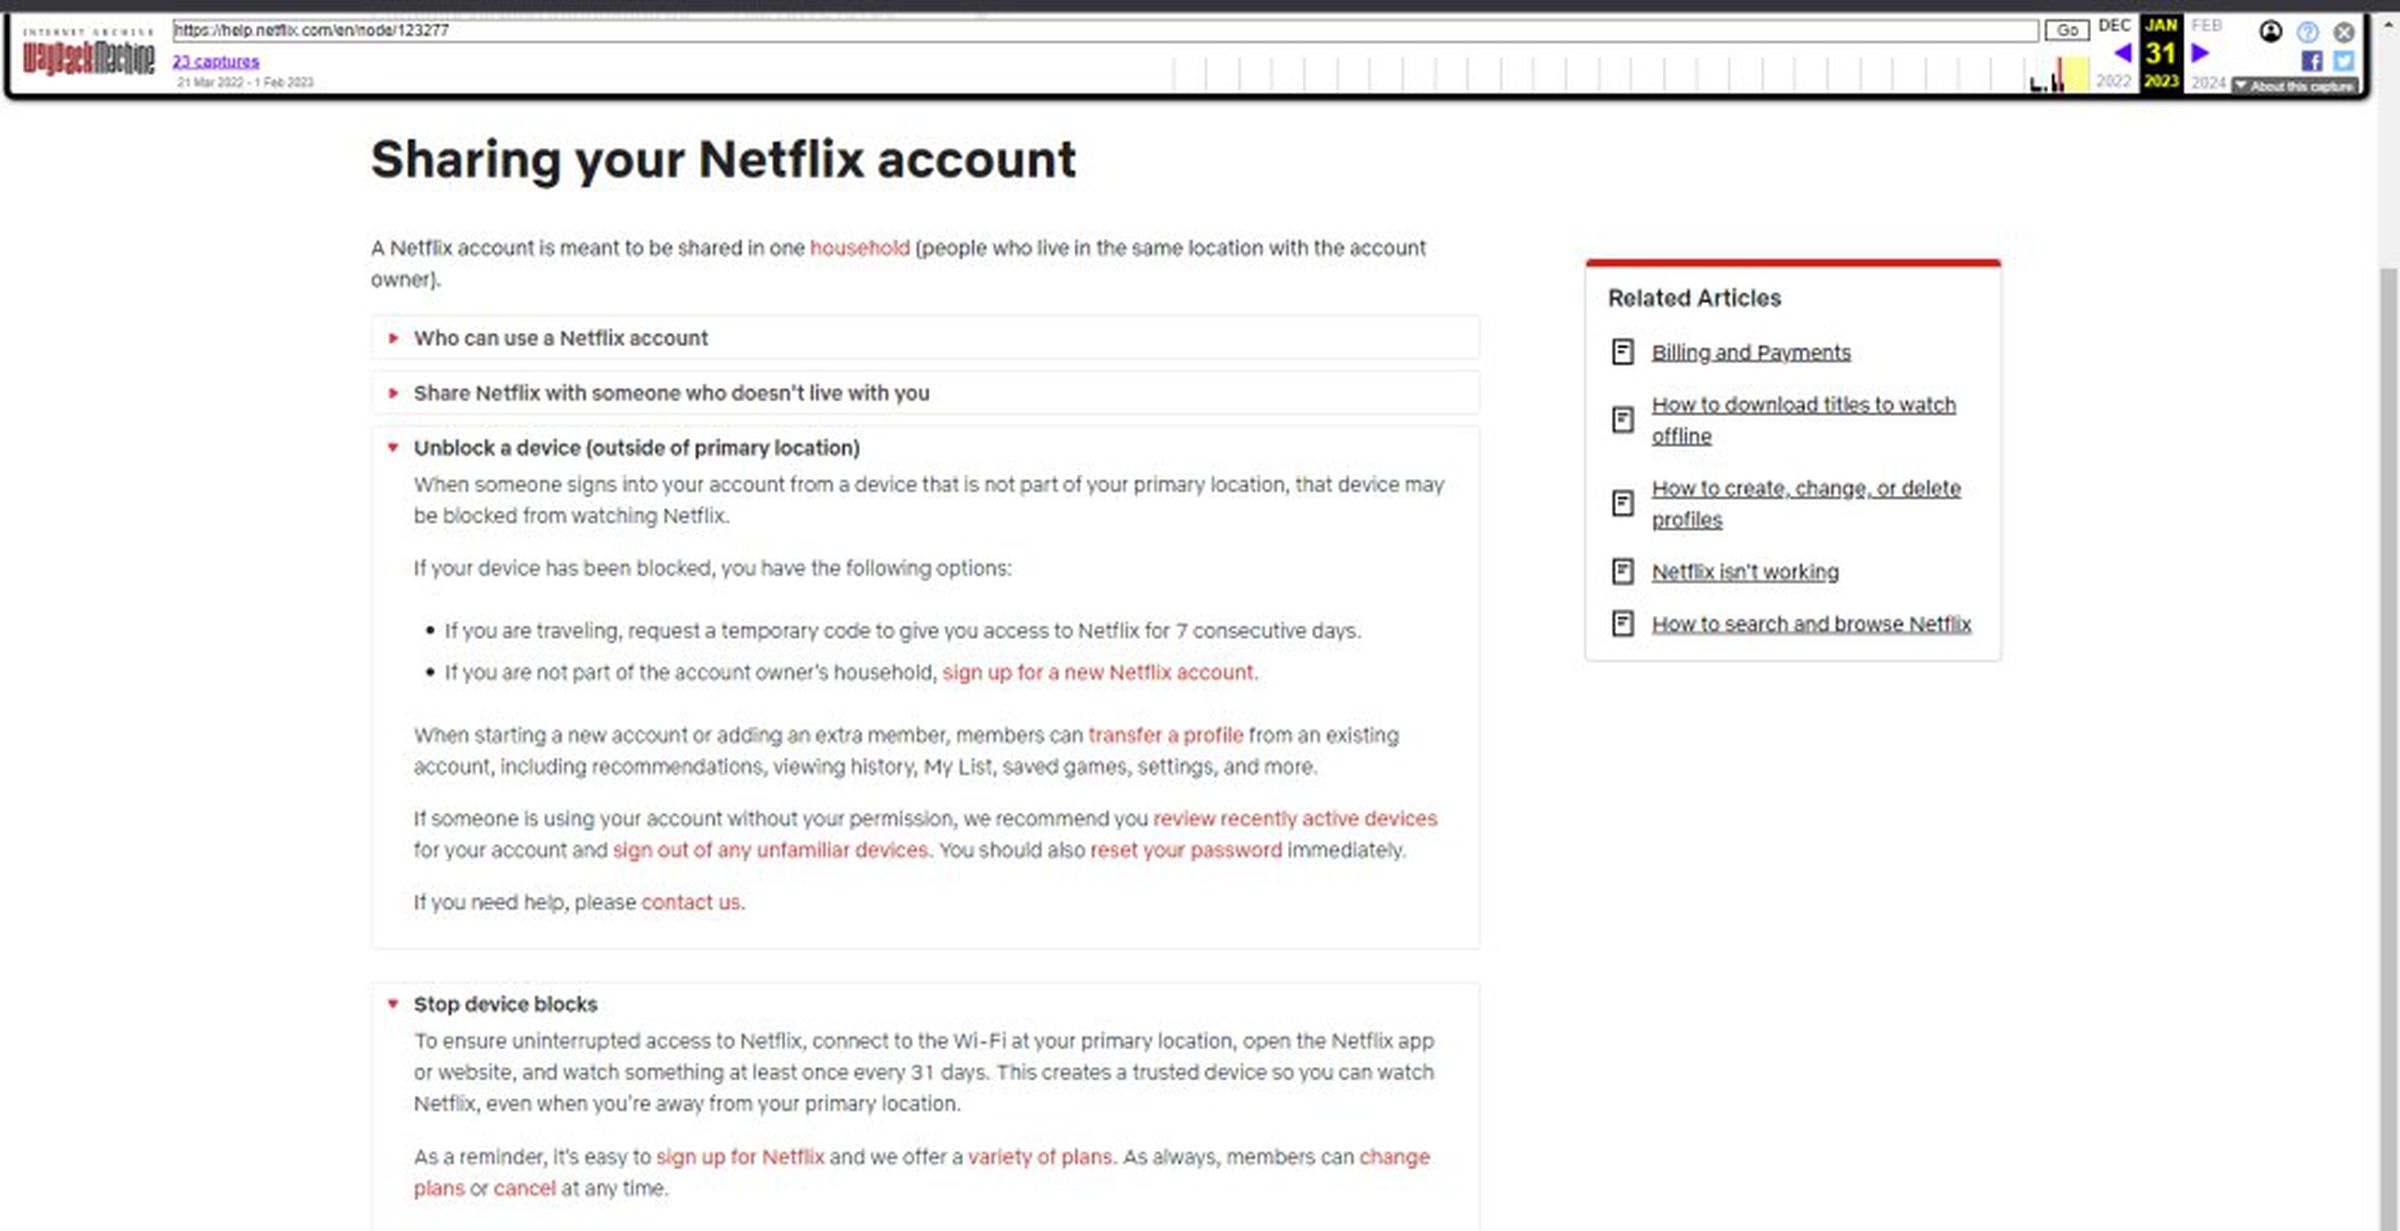 An archived support page says that Netflix can block a device that is 